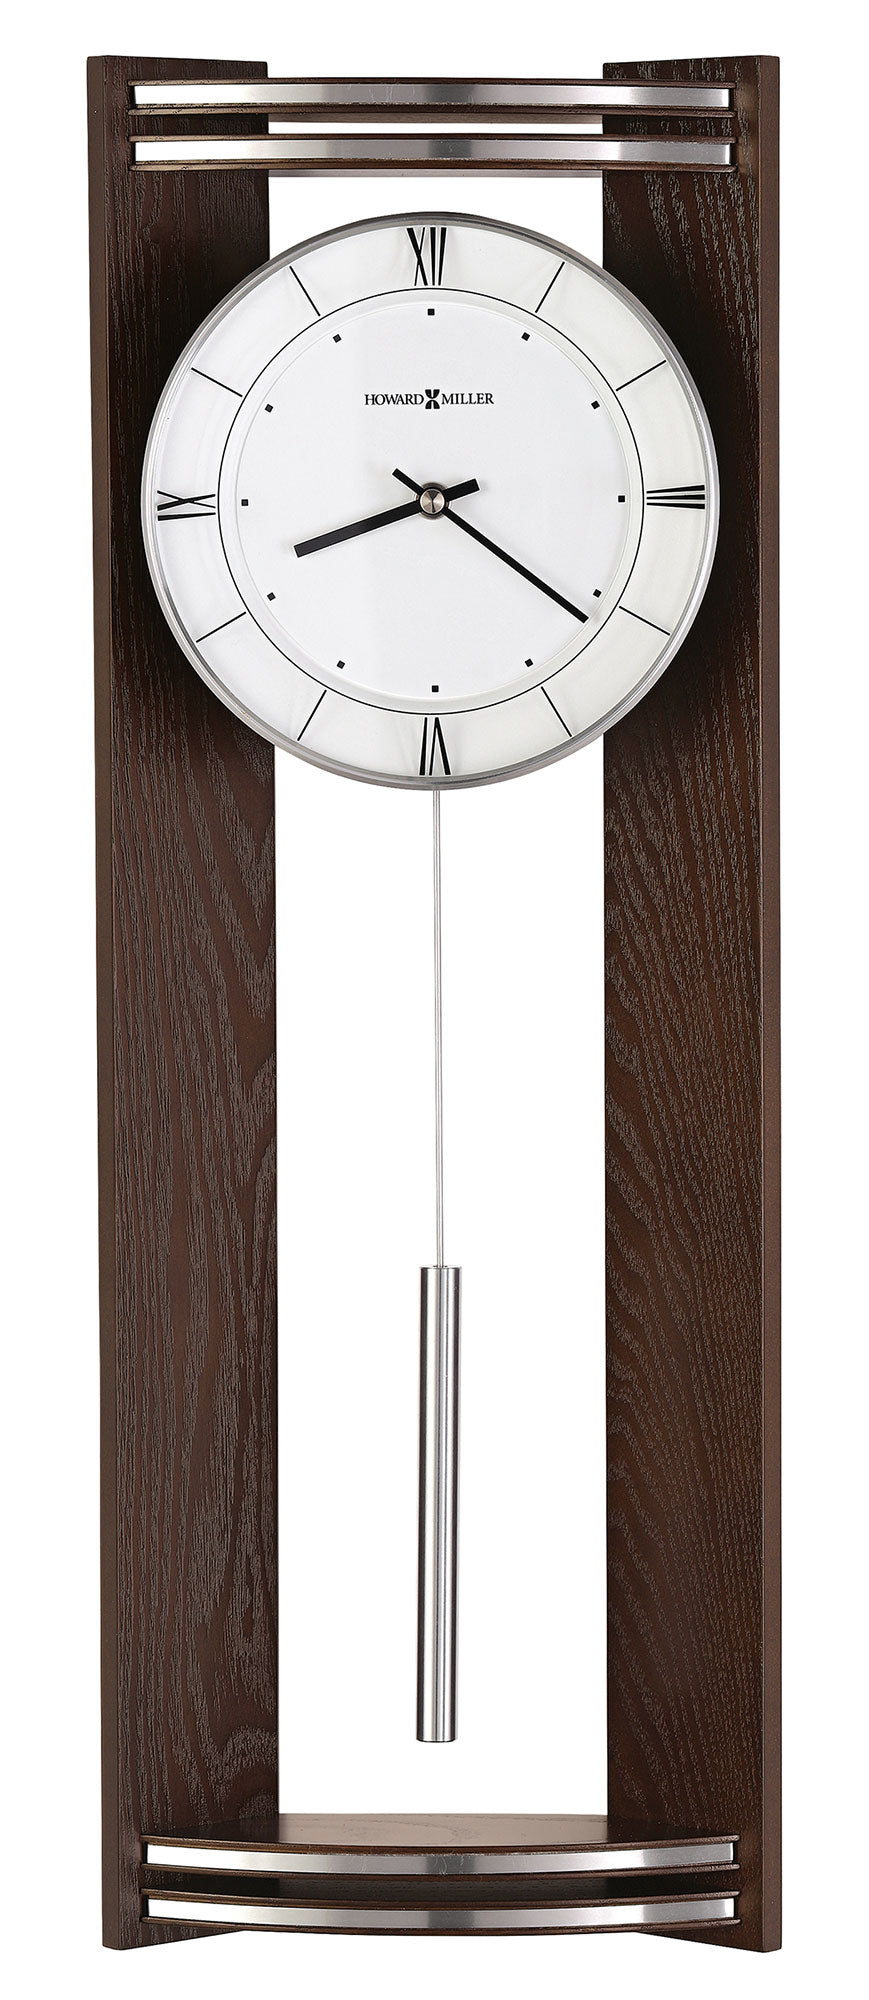 Deco Wall Clock by Howard Miller